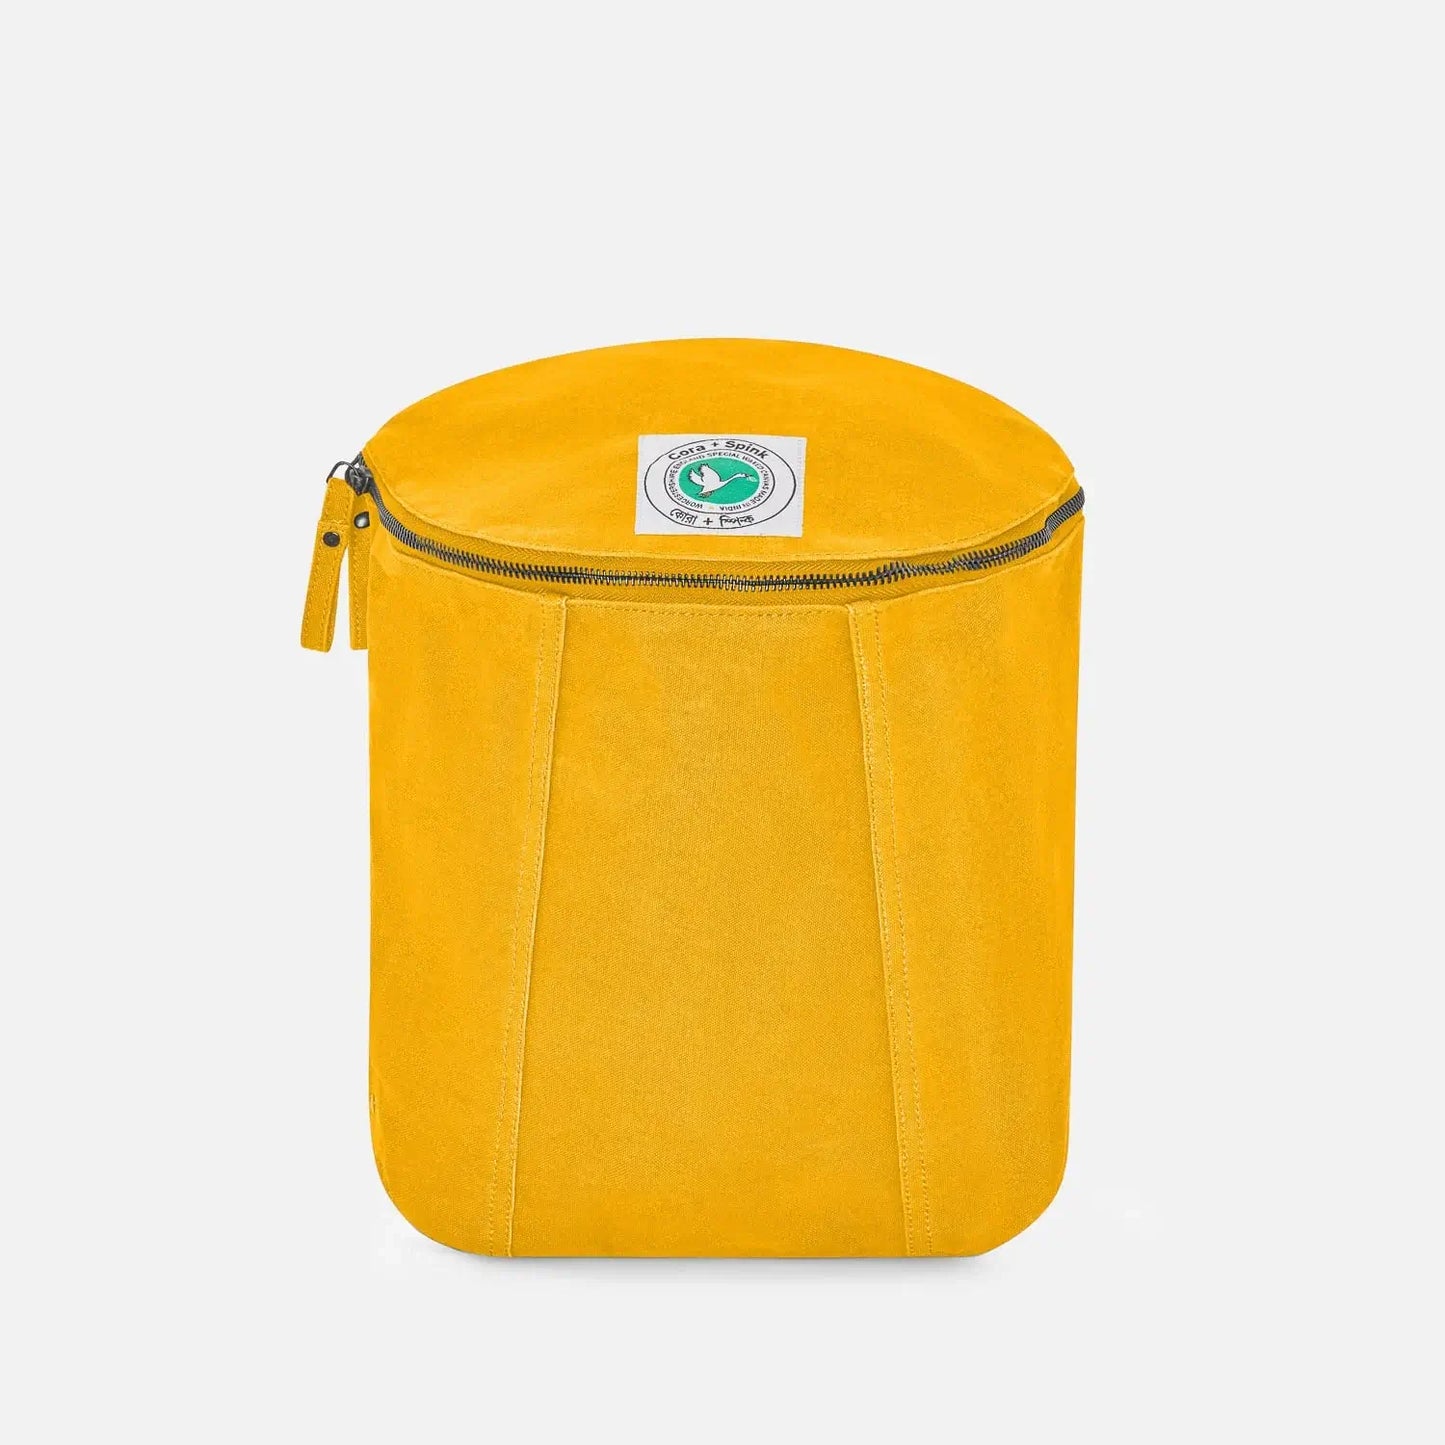 Cora + Spink Ten Ball Backpack - It's Yellow